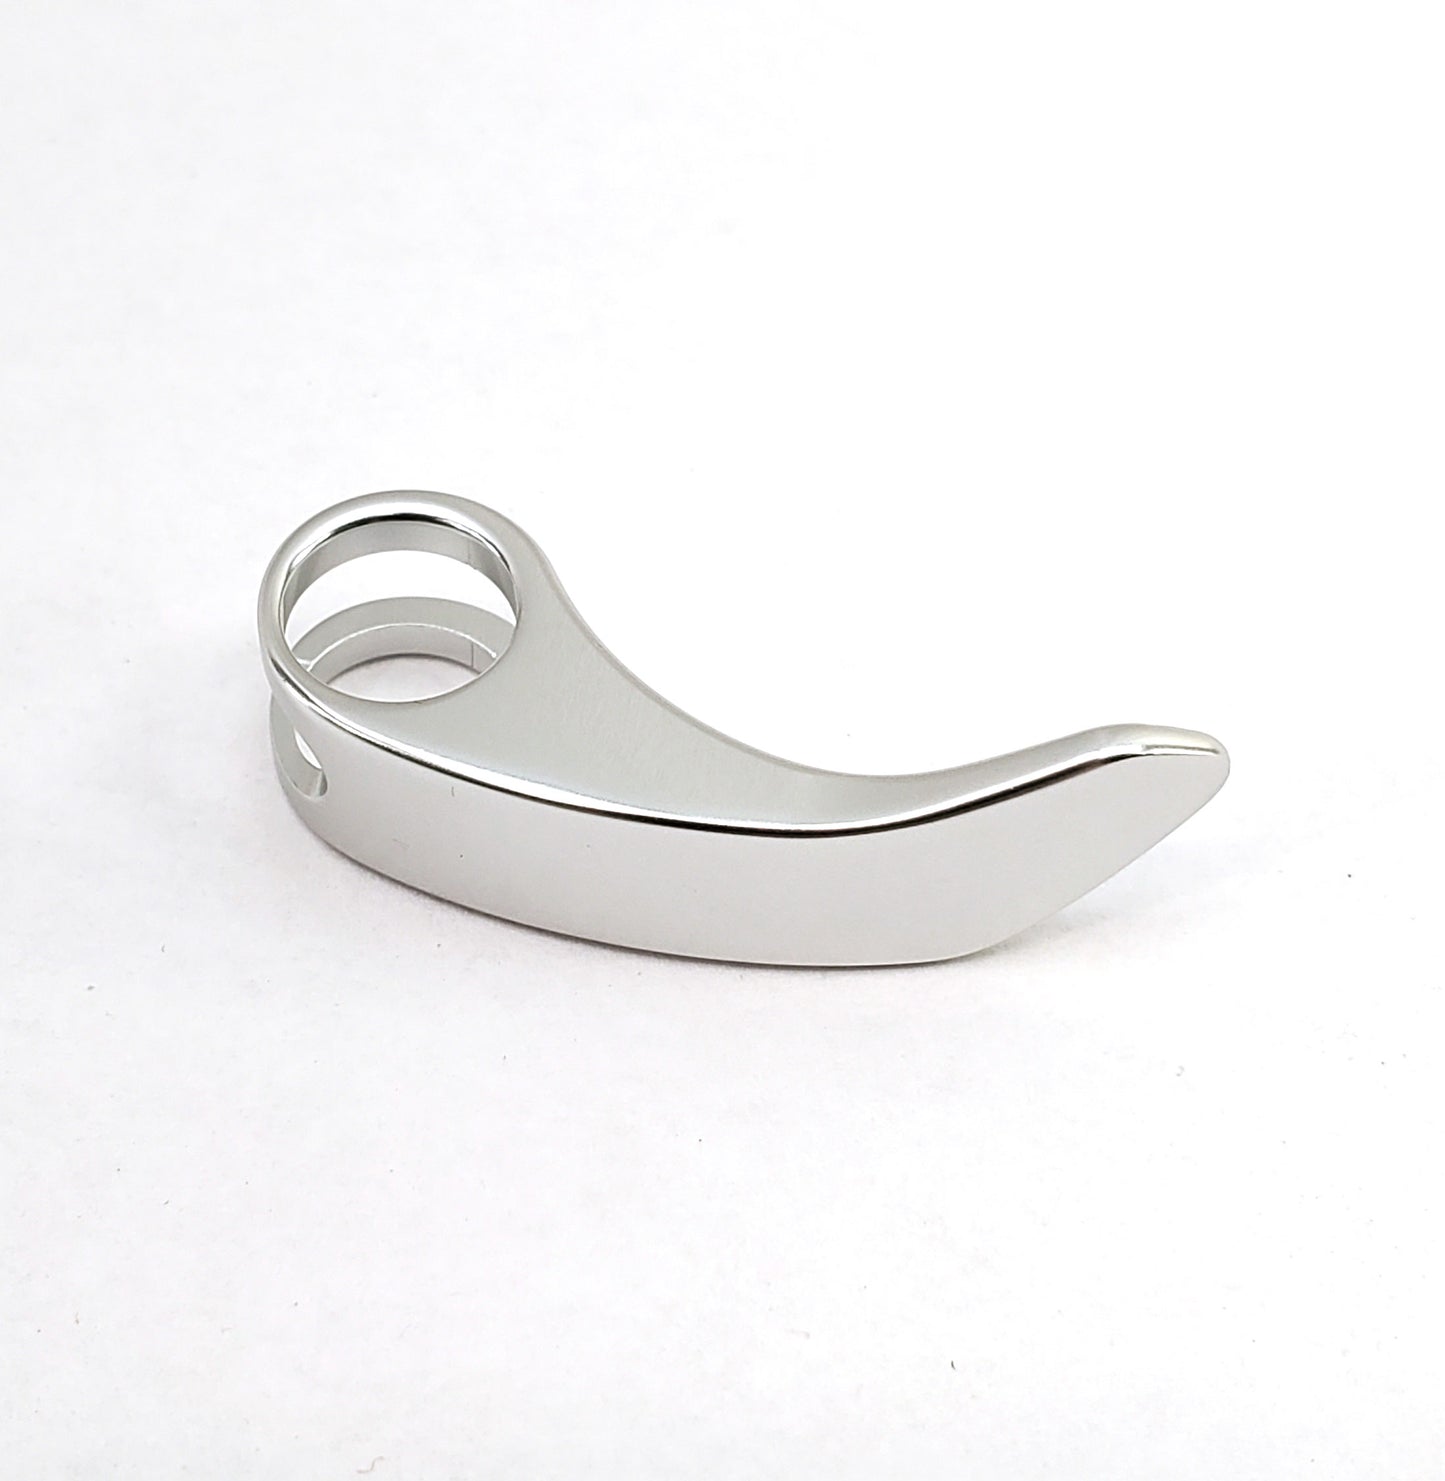 Empire Syx Replacement Part - Feedneck Lever - Polished Silver